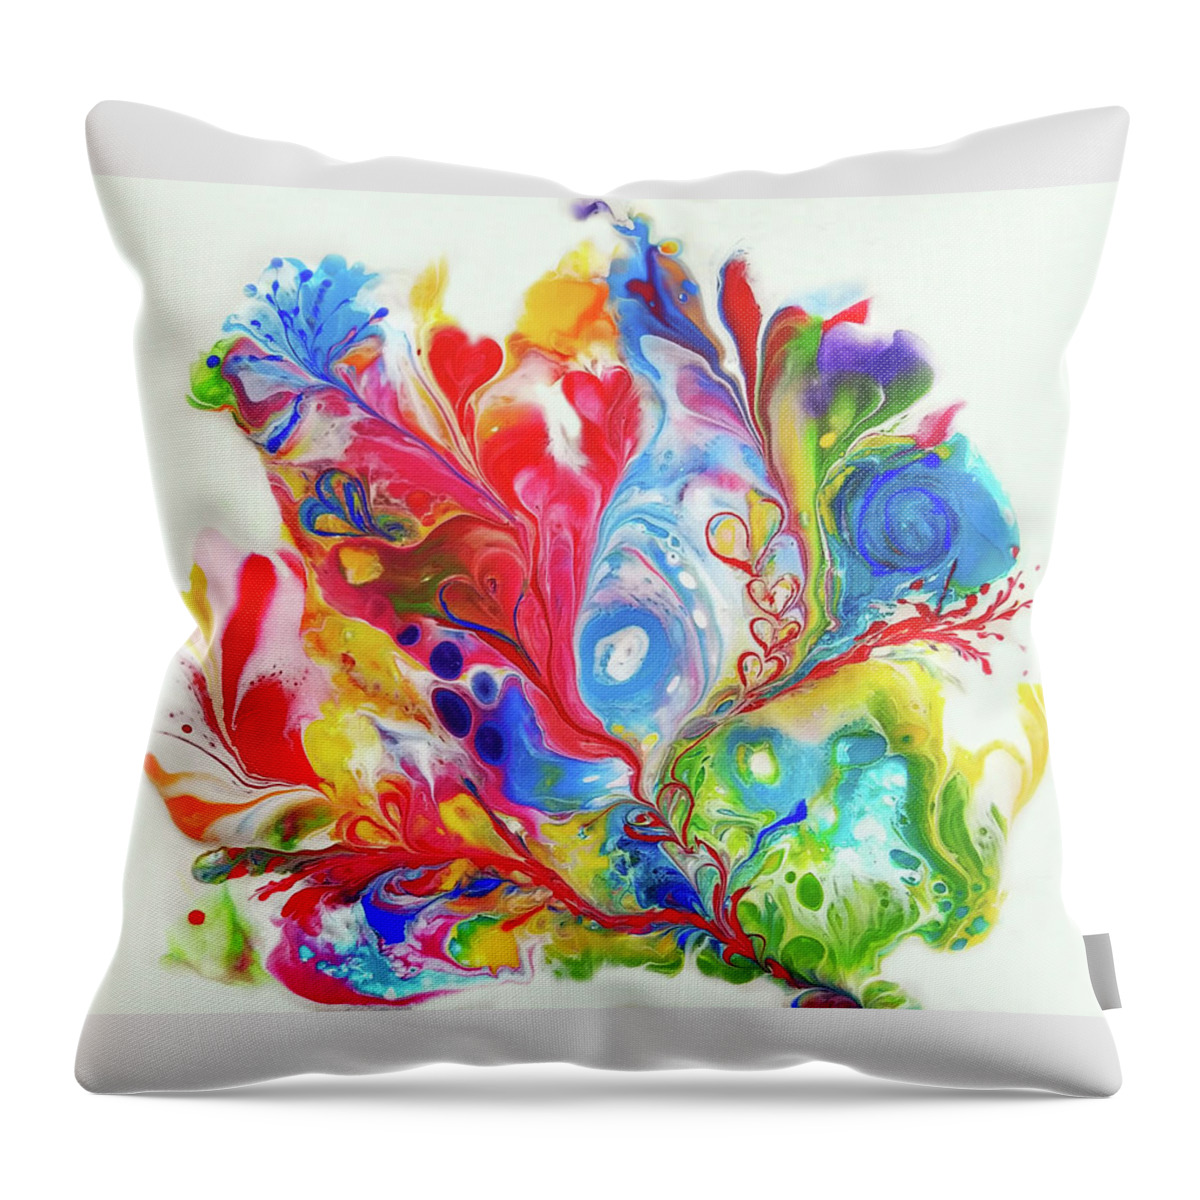 Colorful Throw Pillow featuring the painting Wonder #1 by Deborah Erlandson